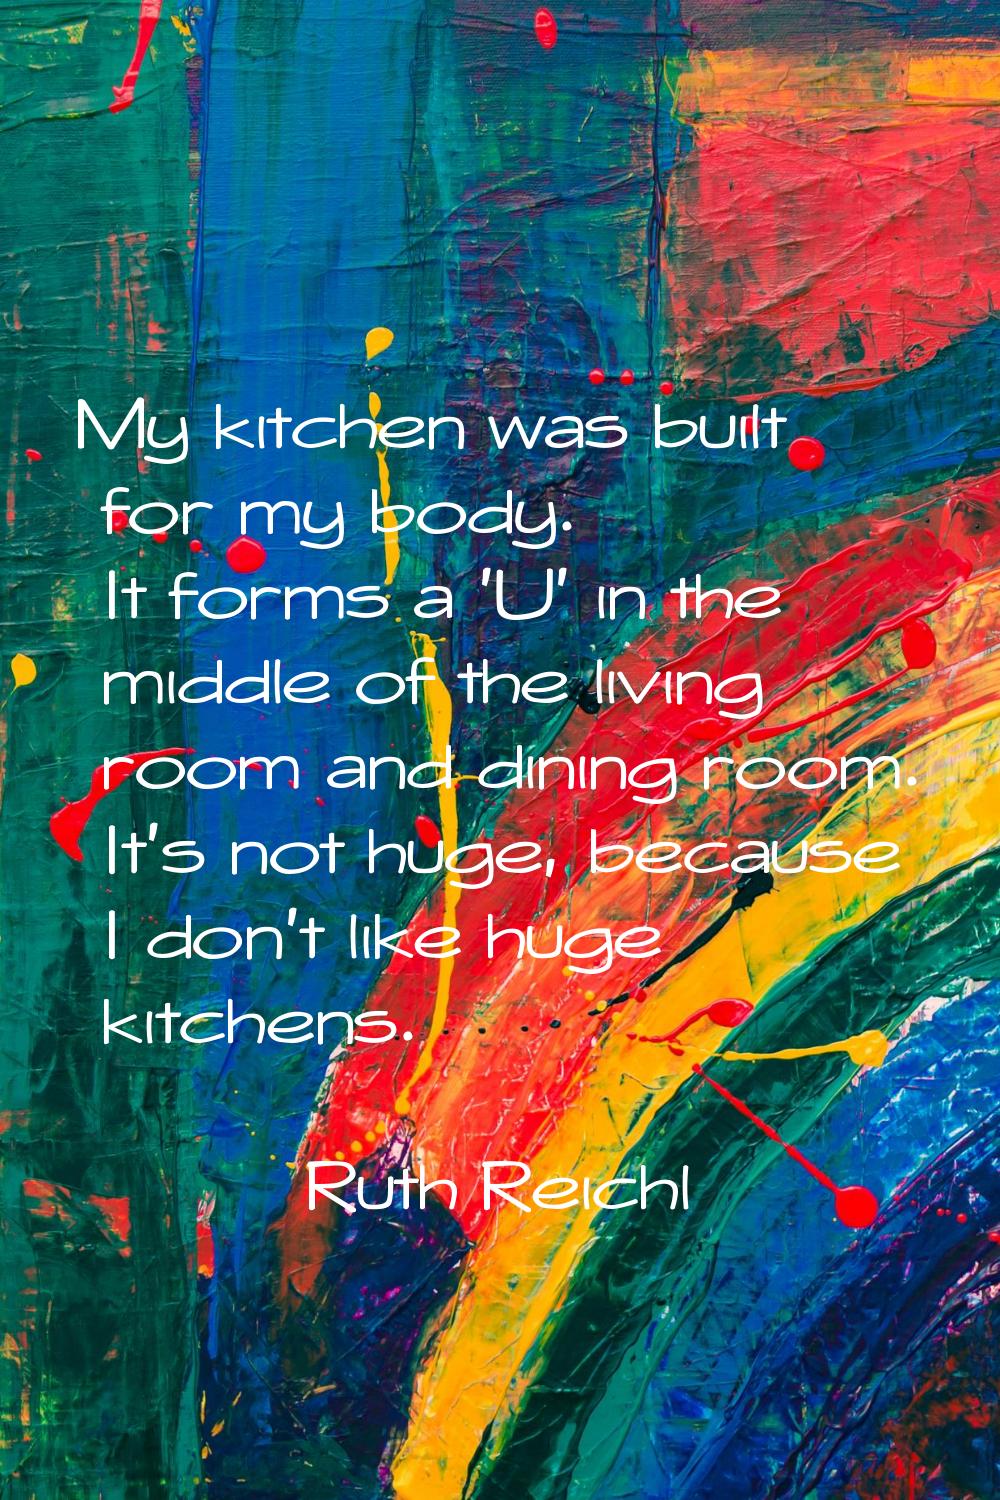 My kitchen was built for my body. It forms a 'U' in the middle of the living room and dining room. 